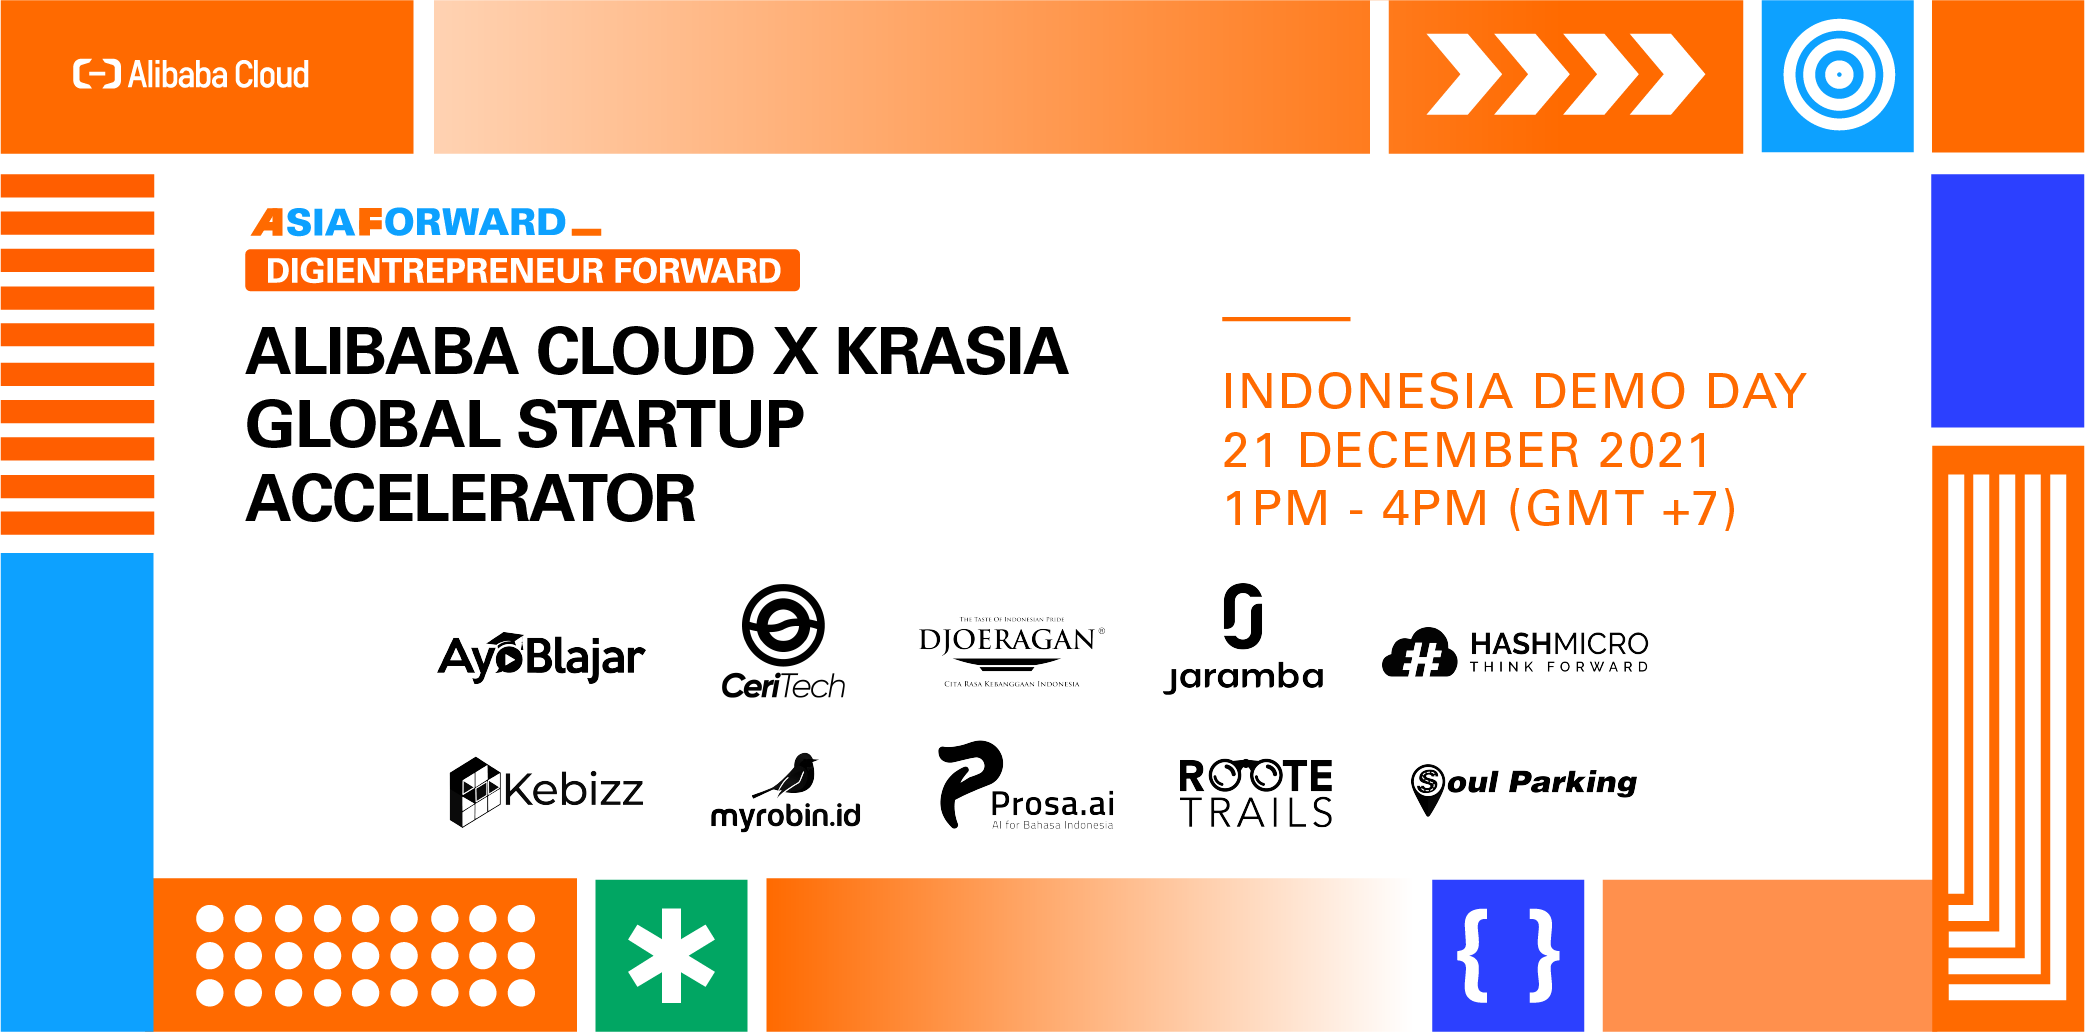 Alibaba Cloud x KrASIA Global Startup Accelerator announces finalists for the second Indonesia Demo Day